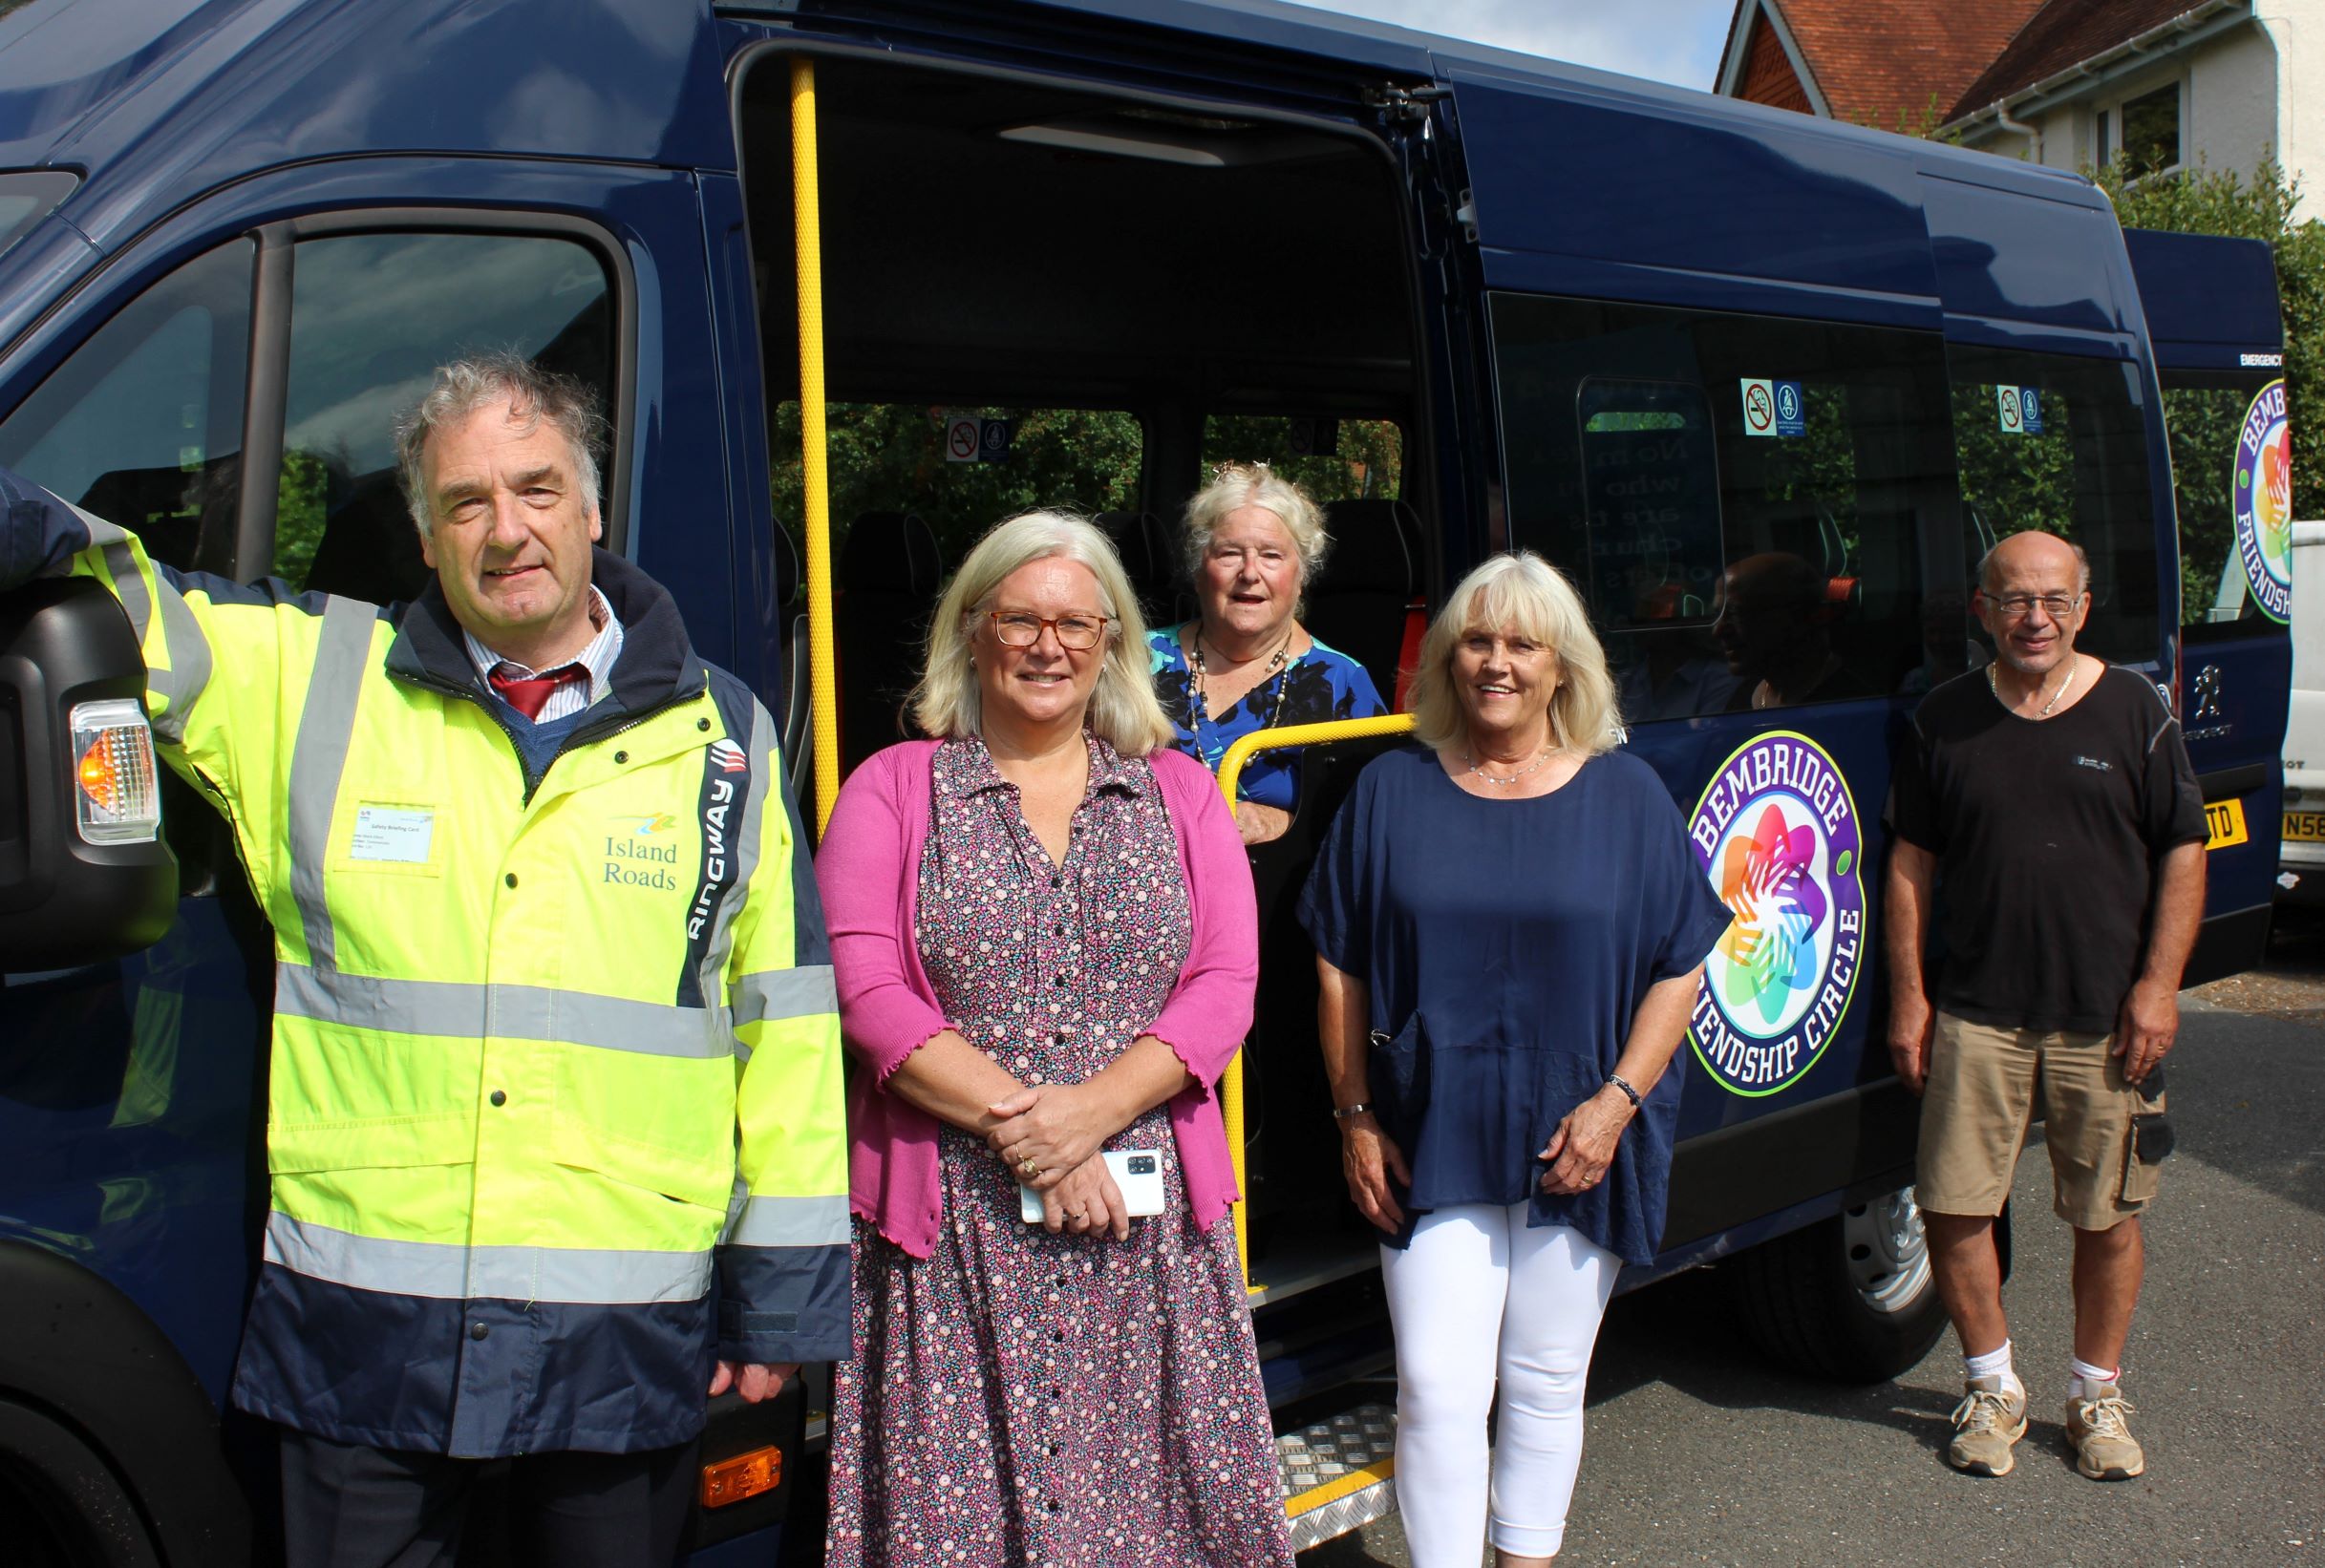 Picture shows volunteers and Island Rads' Mark Eliiott standing by the new bus